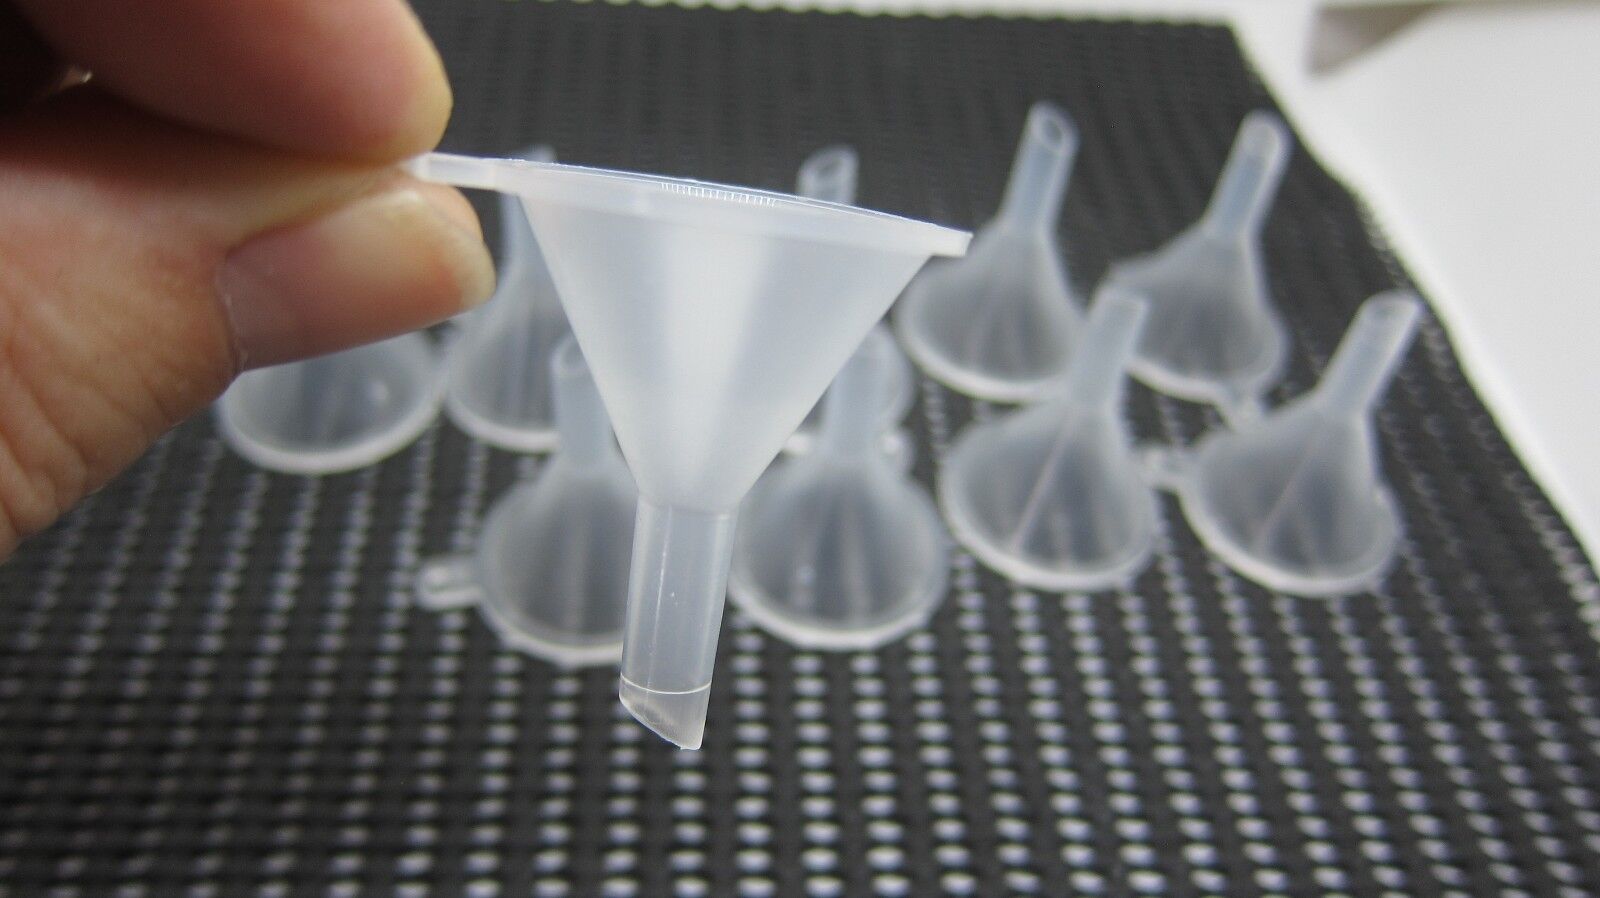 10 pcs Tiny Plastic Mini Funnel For Perfume Diffuser Liquid Oil Funnels  Unbranded Does Not Apply